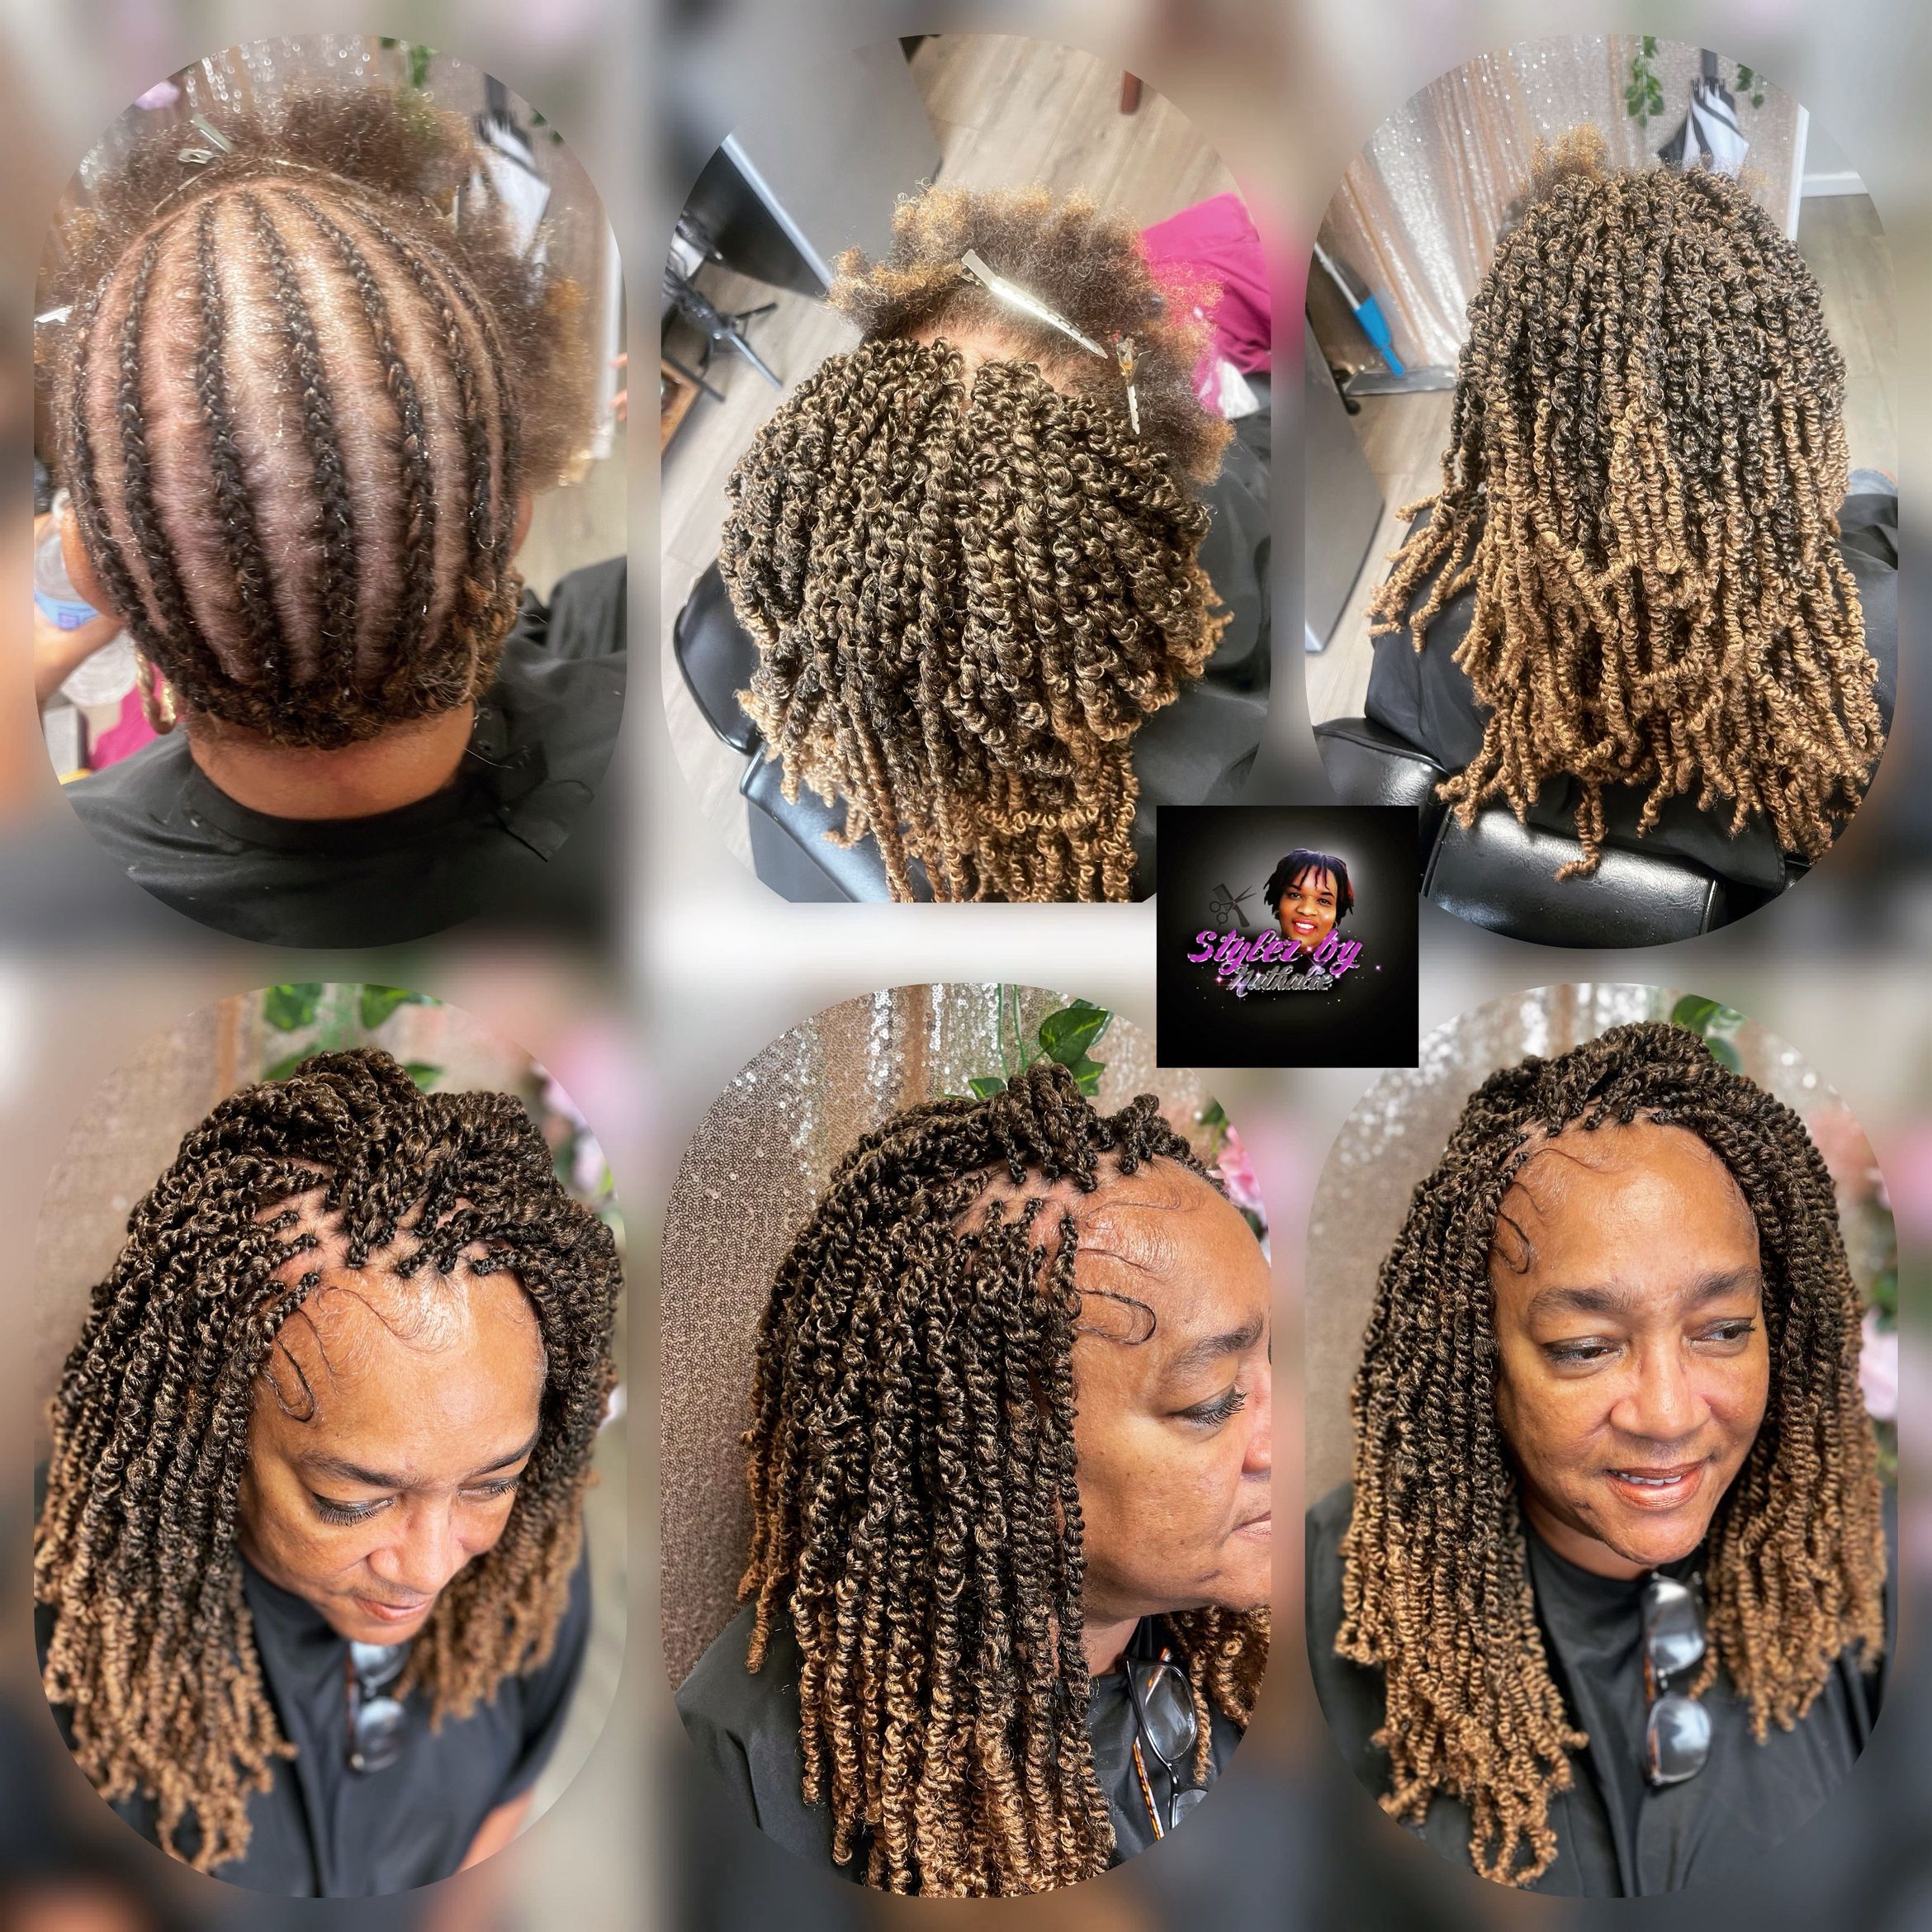 Individual braids/twists and crochet in the back portfolio